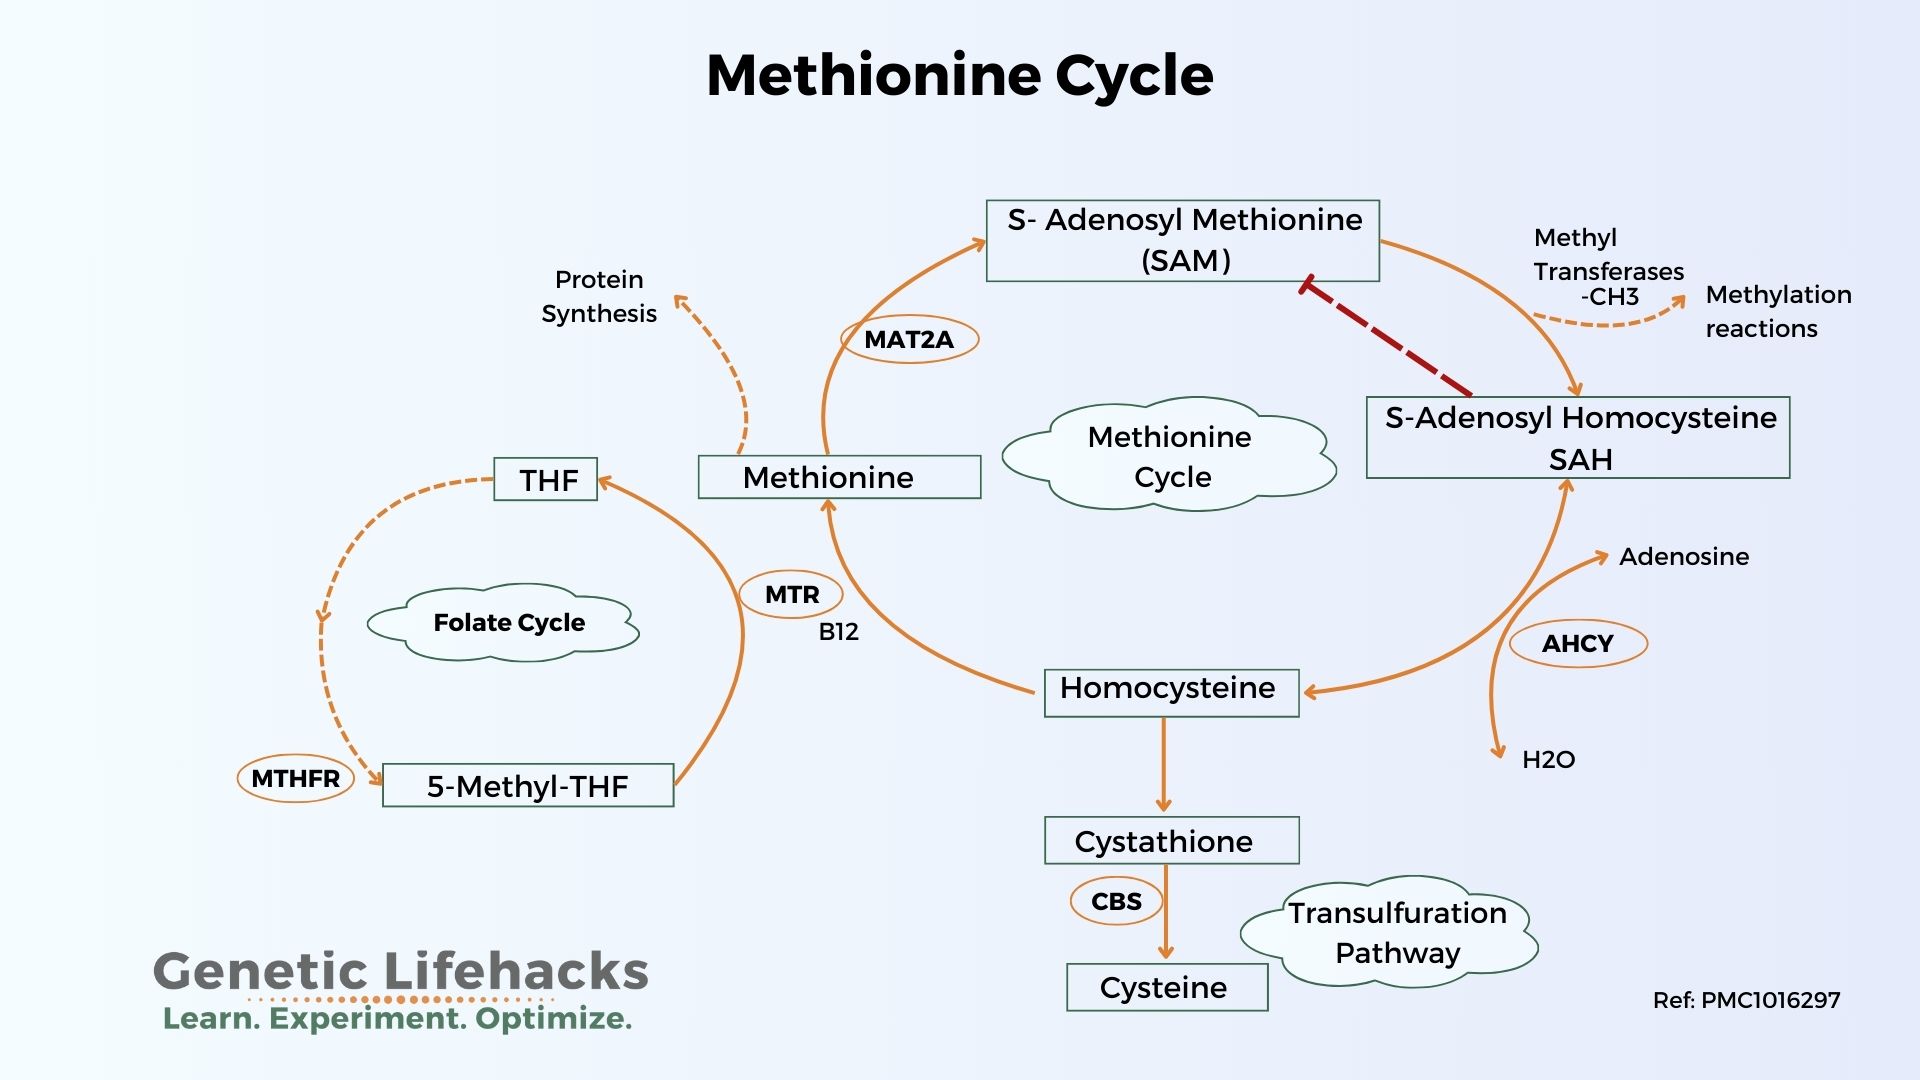 diagram of the methionine cycle within the methylation cycle. AHCY plays a key role here in regulating SAH and SAM levels